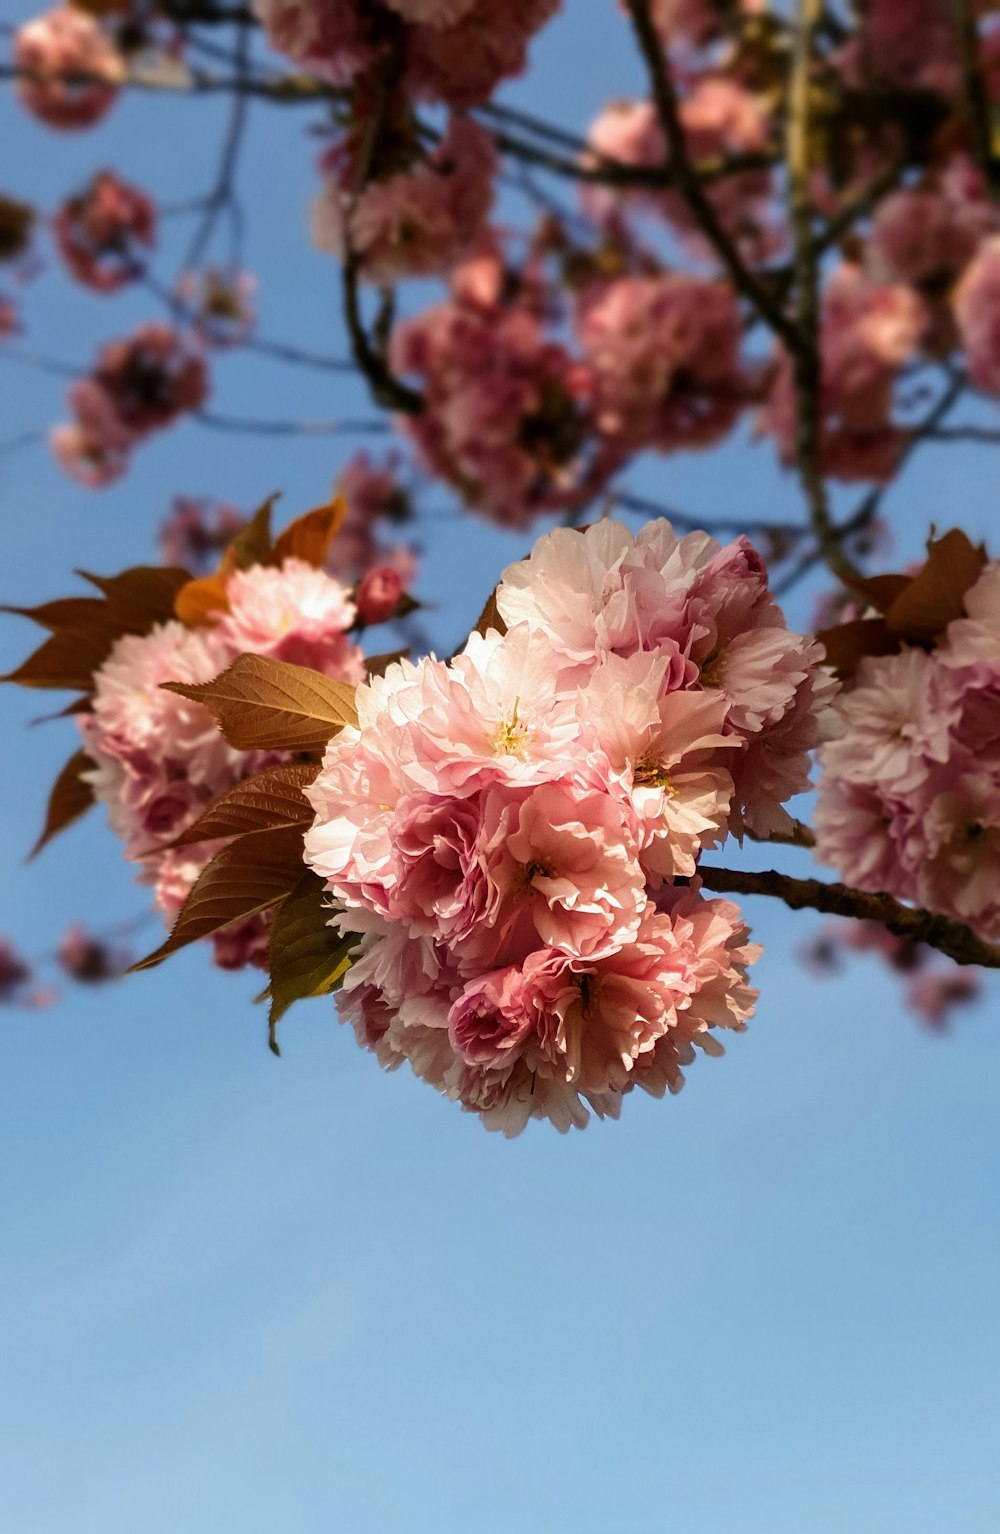 pink flowers on brown tree branch